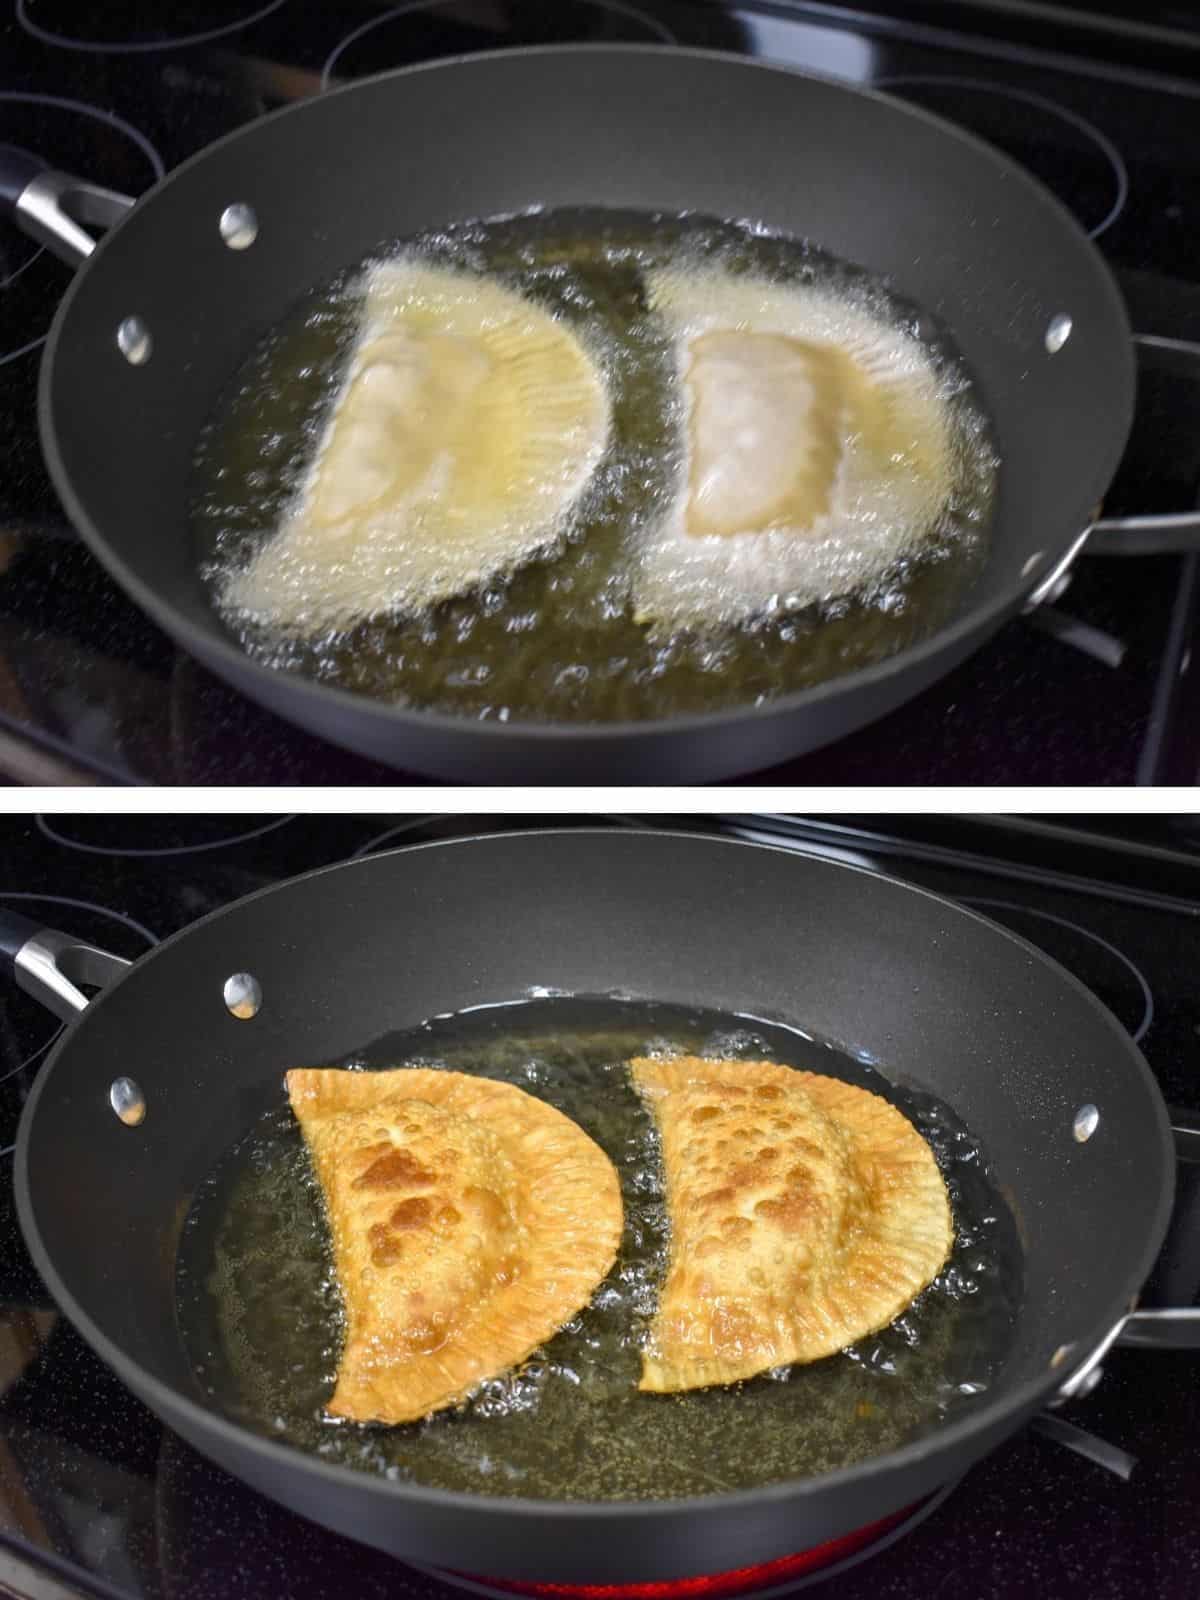 Two images of two empanadas frying in a large, black skillet. The top image is when they were first added and the second is when one side is golden brown.